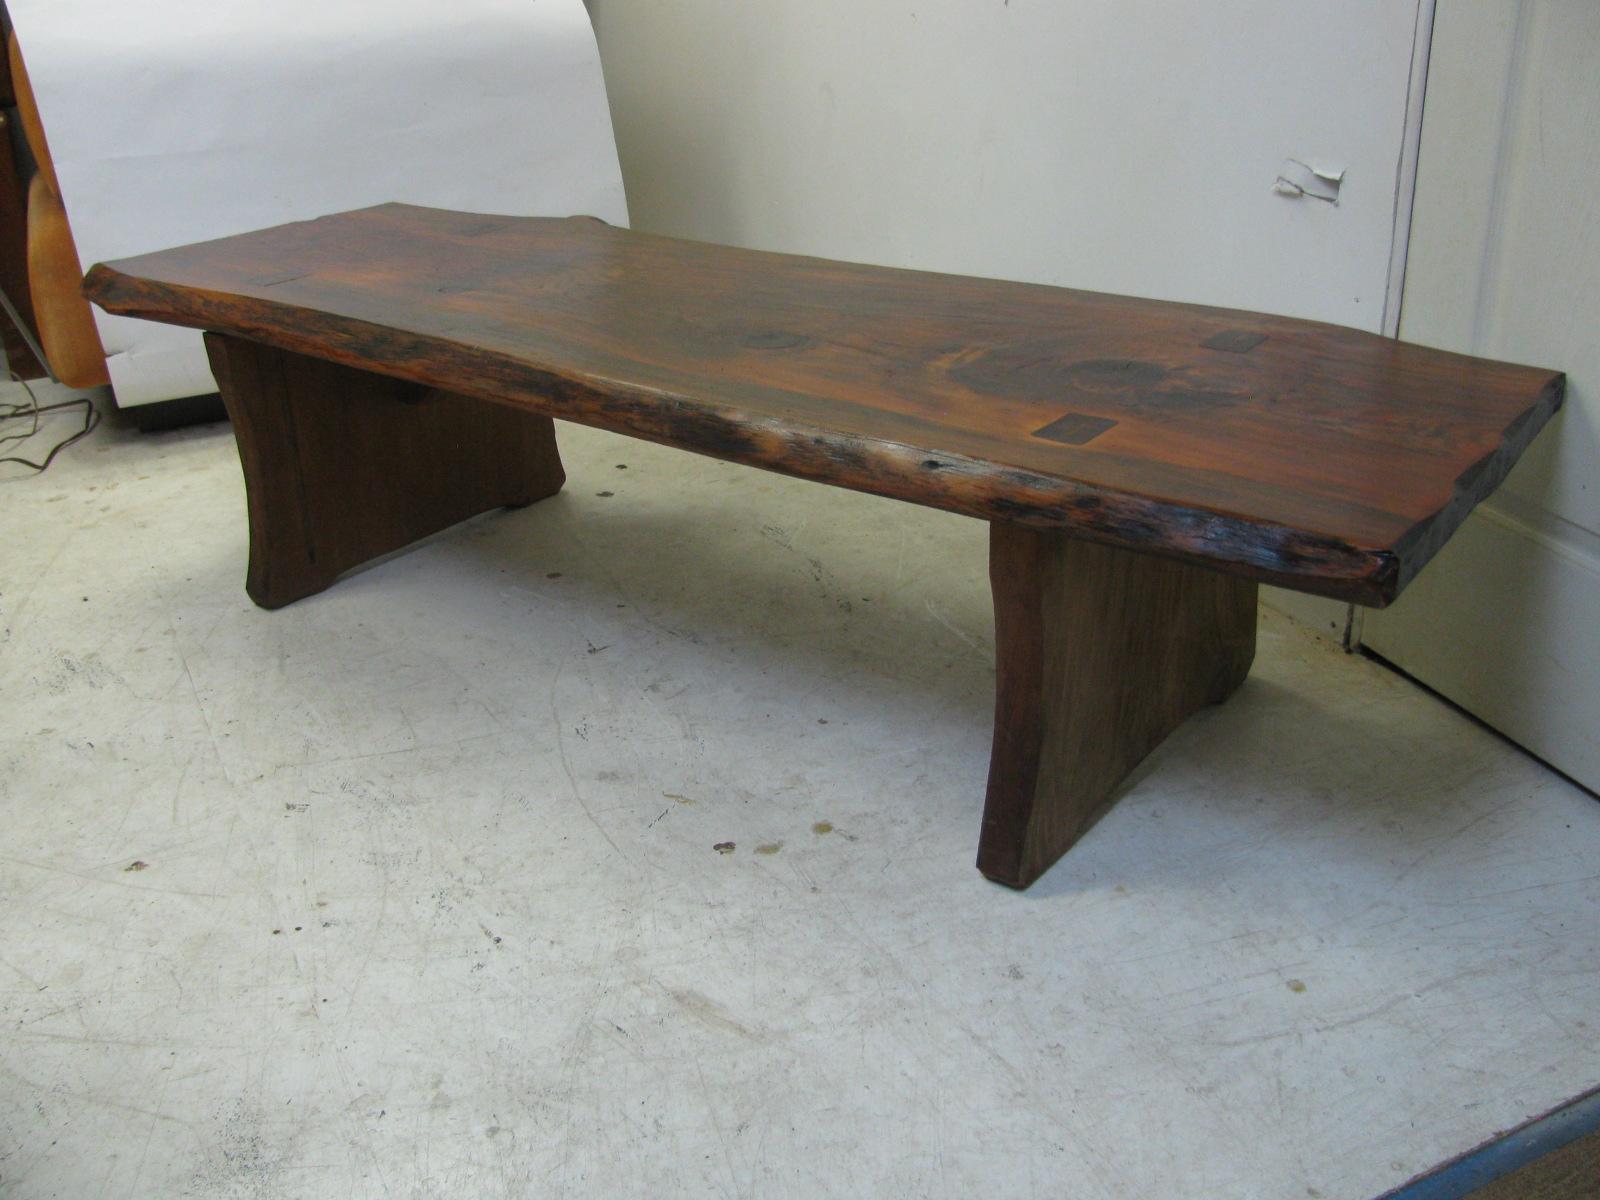 Elegant and simple live edge cocktail table. Large slab that is wide (24in. x 67in x 16.5in hgt.) and long. Slab style base is mortised thru the top and locked in with splines. Well constructed piece, very sturdy. Can also be used as a bench.